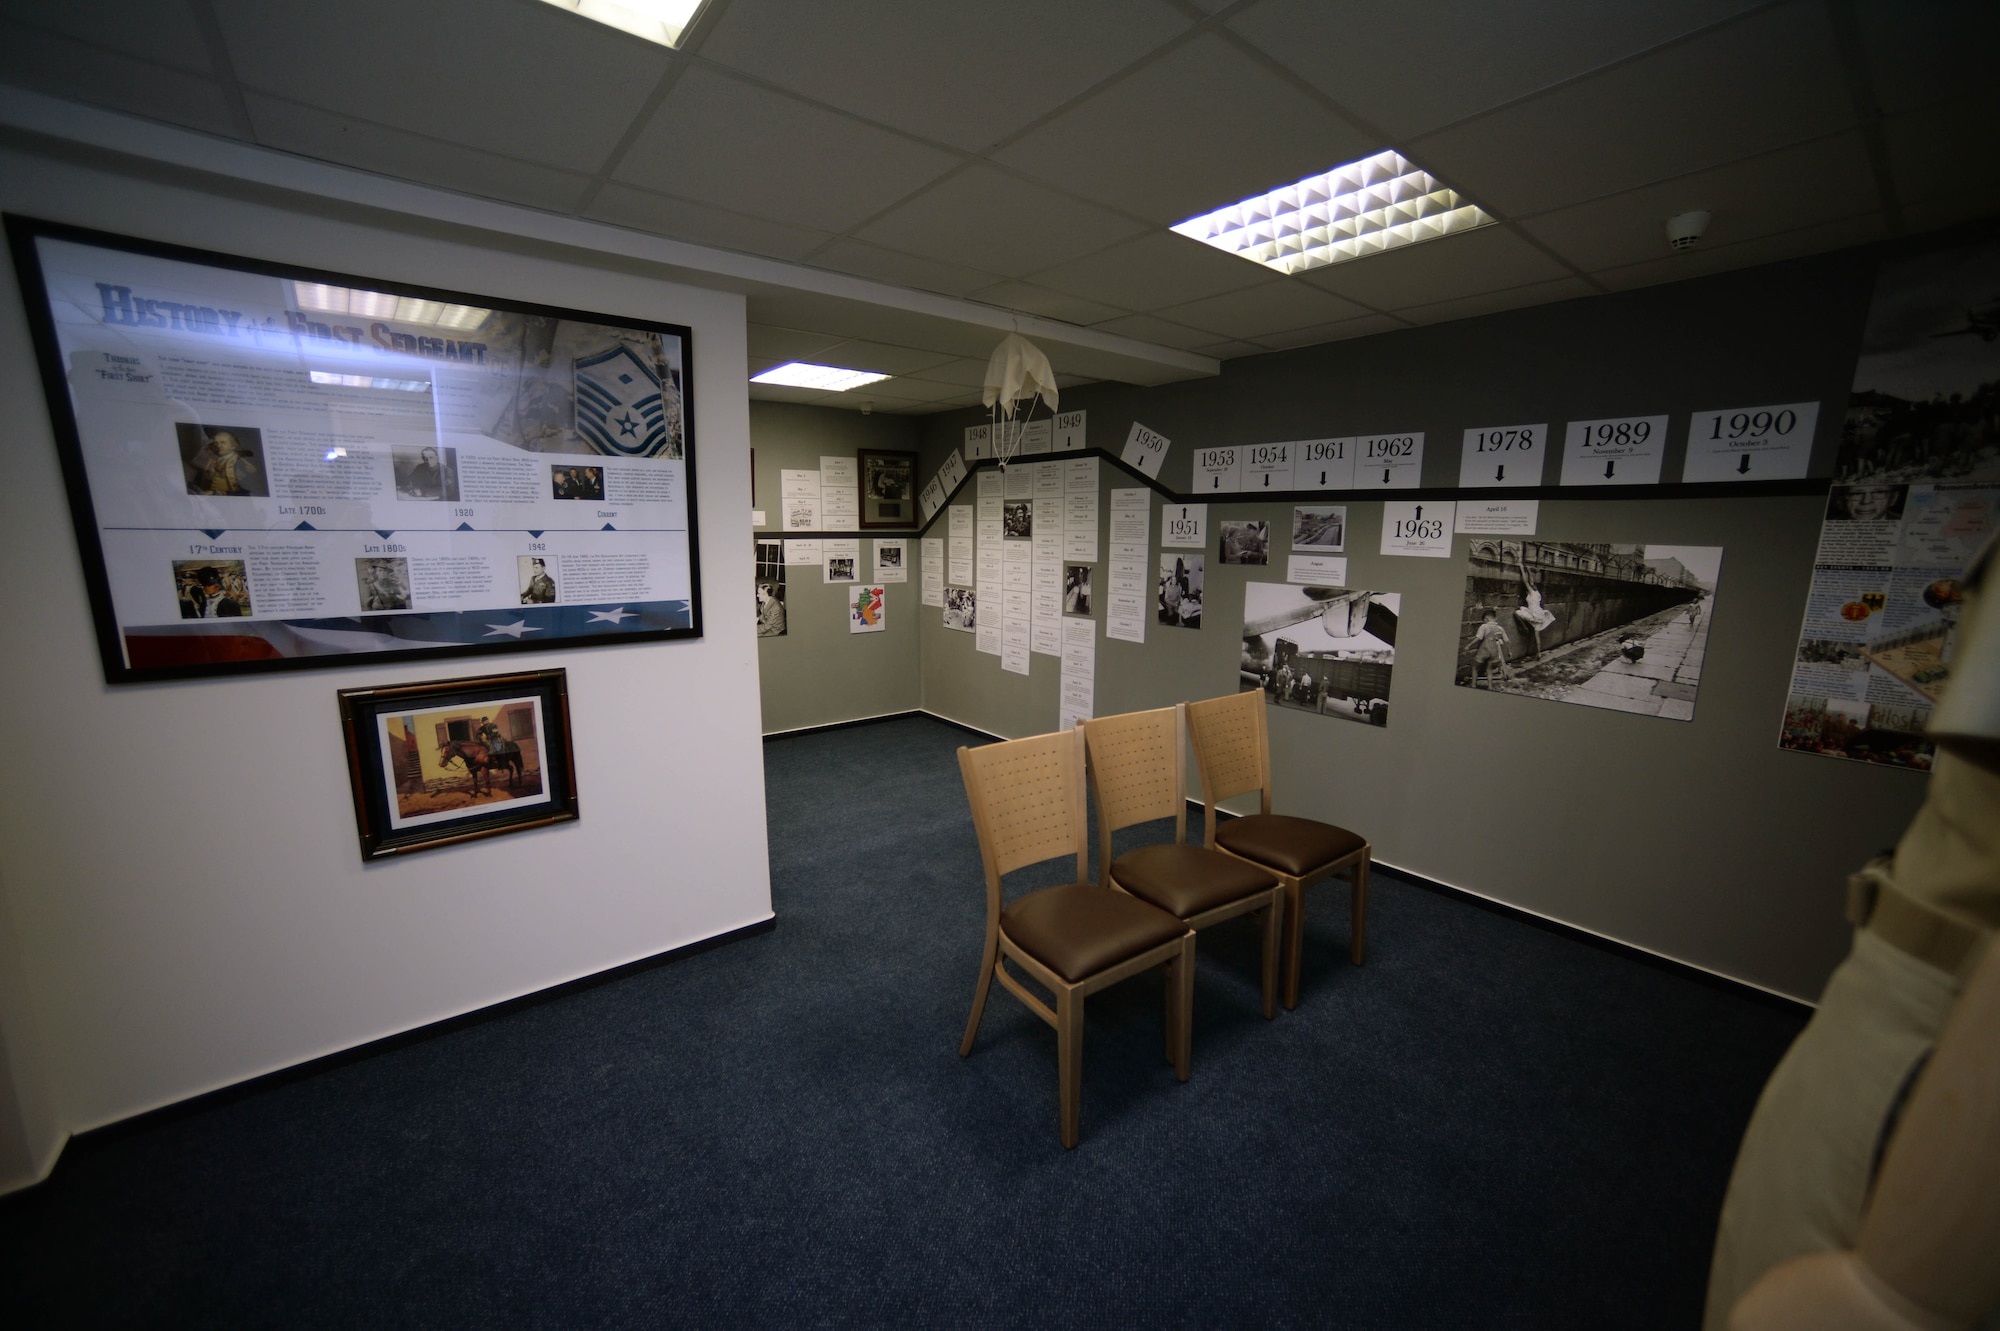 Various U.S. Air Force graphics remain on display in the Pitsenbarger Heritage Room in the Pitsenbarger Airman Leadership School at Spangdahlem Air Base, Germany, March 4, 2015. The school named the room in honor of U.S. Air Force Airman 1st Class William Pitsenbarger, the first enlisted Airman to be posthumously awarded the Air Force Cross medal in 1966, which was later upgraded to the Medal of Honor in 2000. (U.S. Air Force photo by Airman 1st Class Timothy Kim/Released)